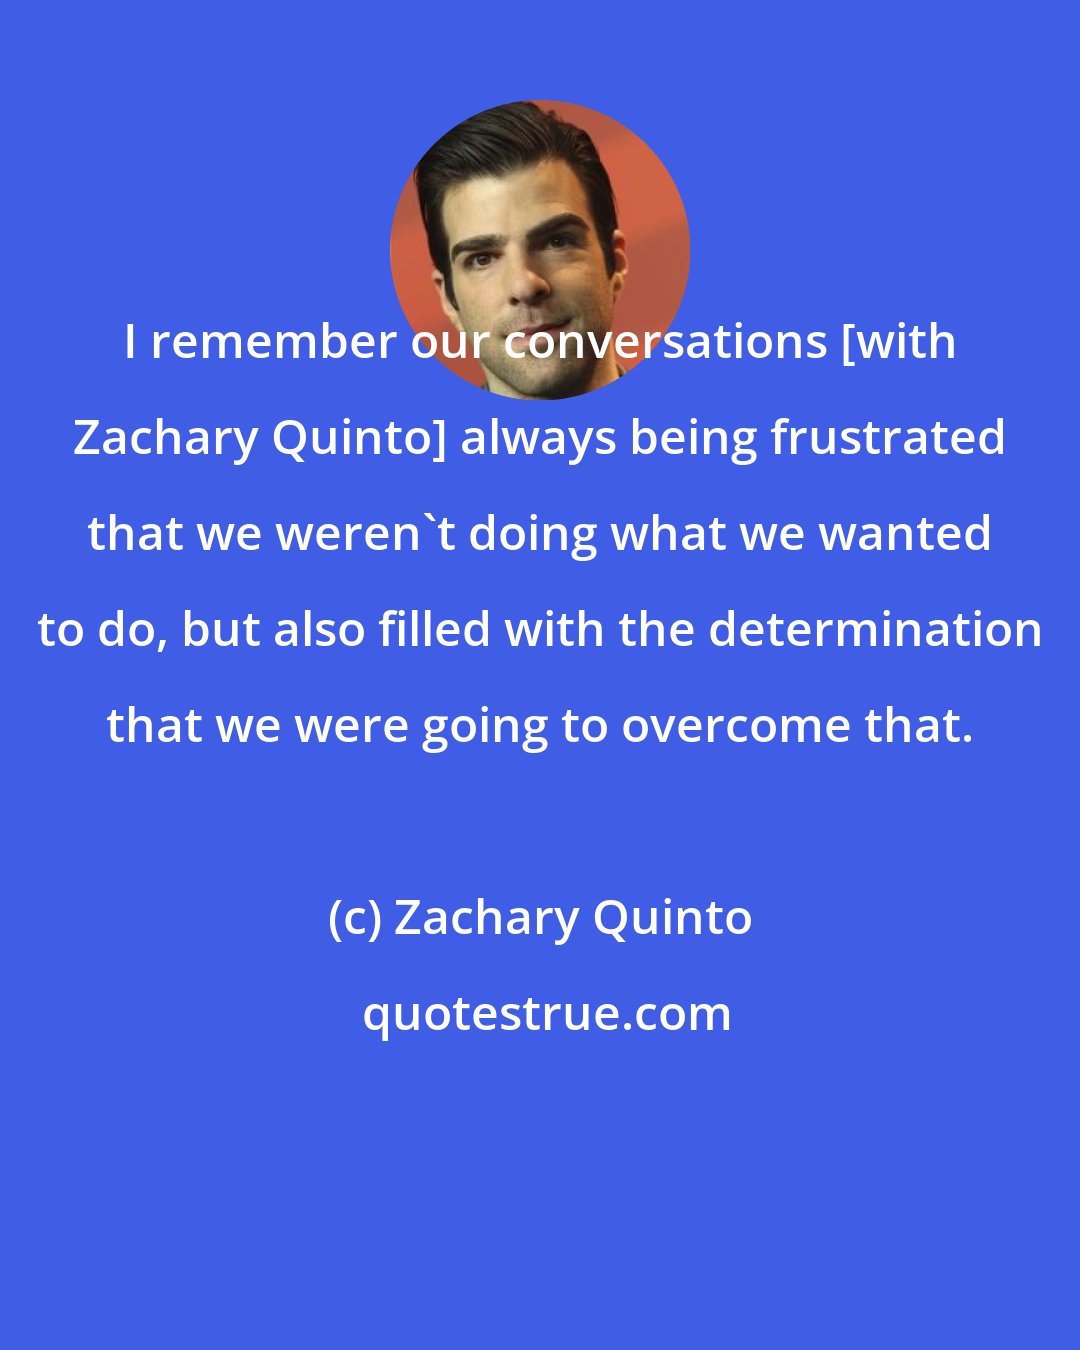 Zachary Quinto: I remember our conversations [with Zachary Quinto] always being frustrated that we weren't doing what we wanted to do, but also filled with the determination that we were going to overcome that.